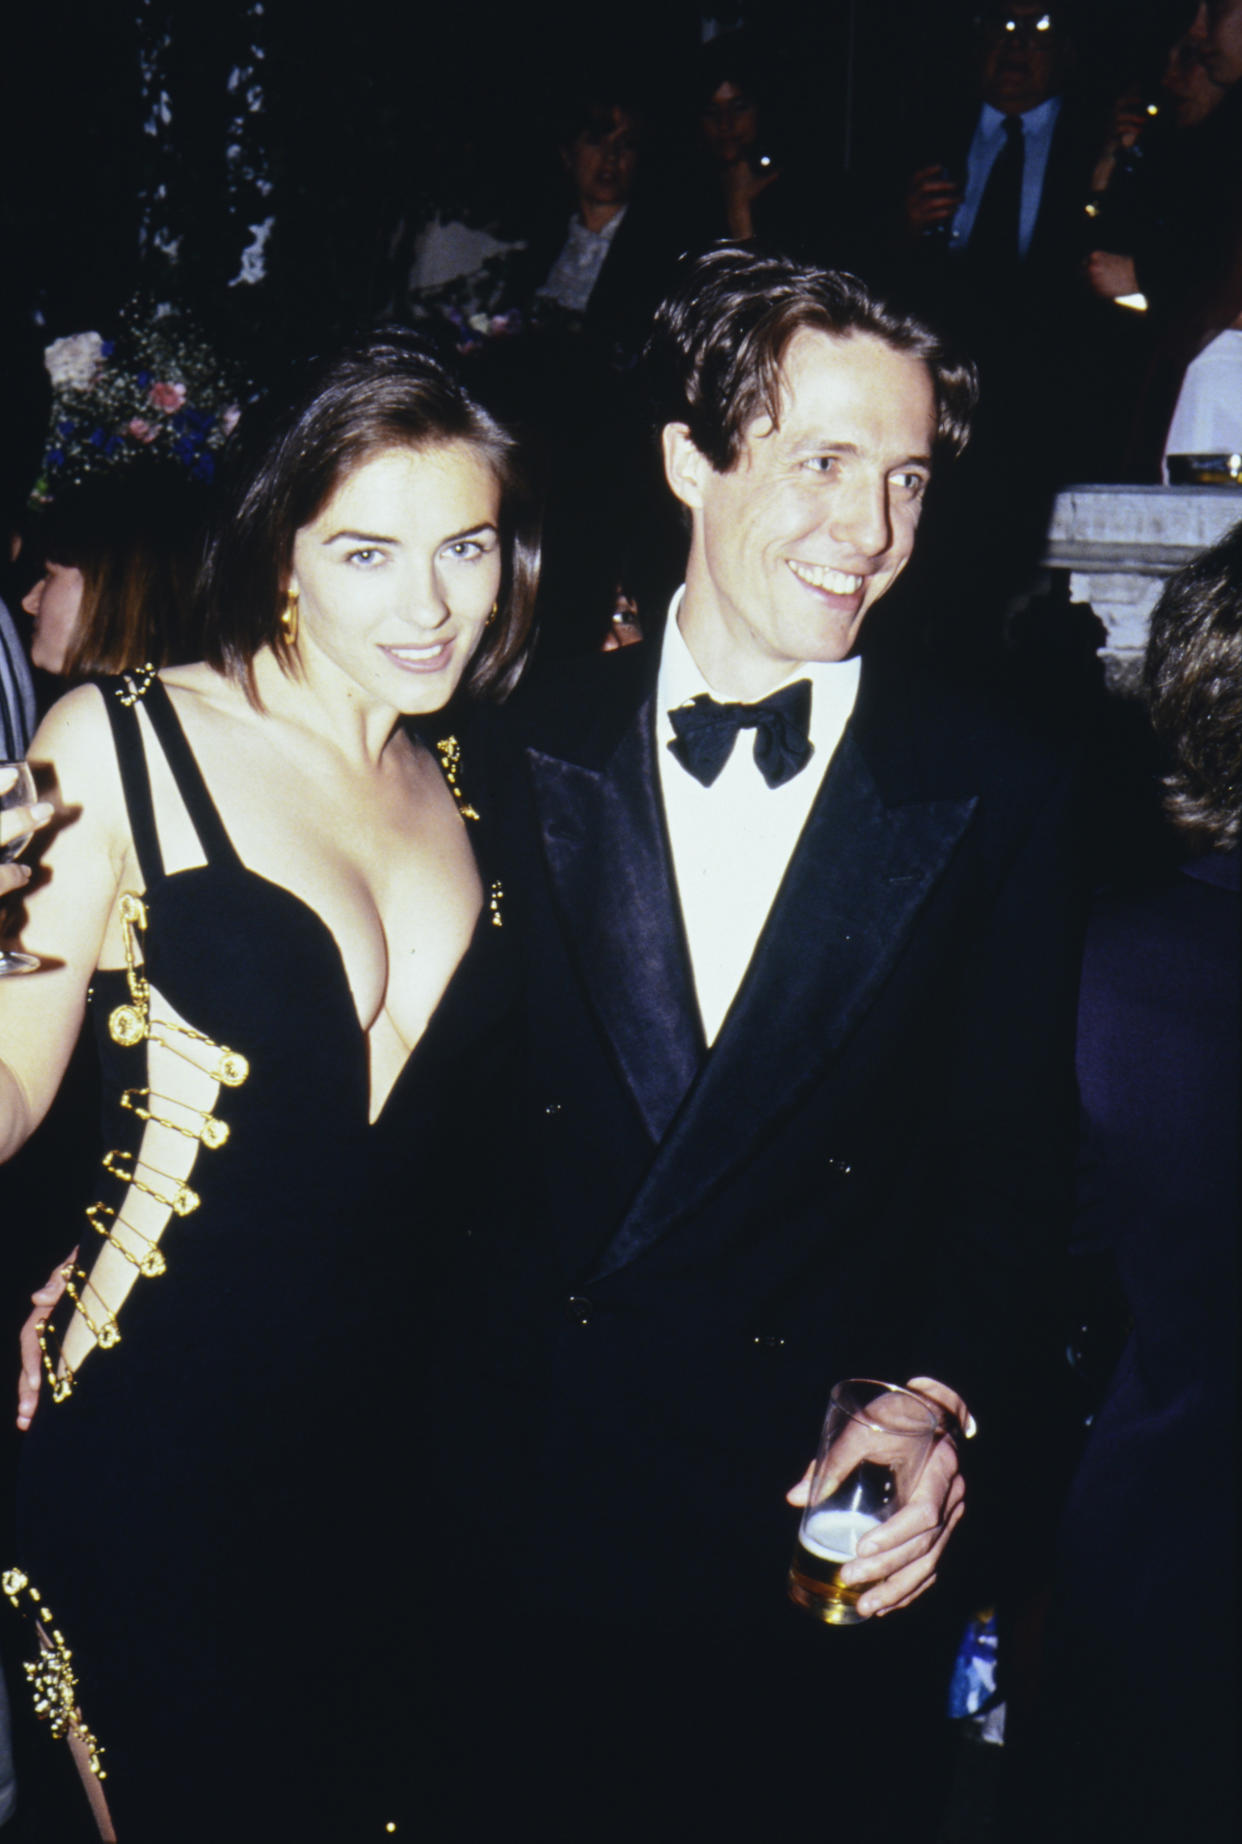 Elizabeth Hurley, famously wearing a Versace dress held together with gold safety pins, and Hugh Grant in 1994 in London. (Photo: Comic Relief/Comic Relief via Getty Images)